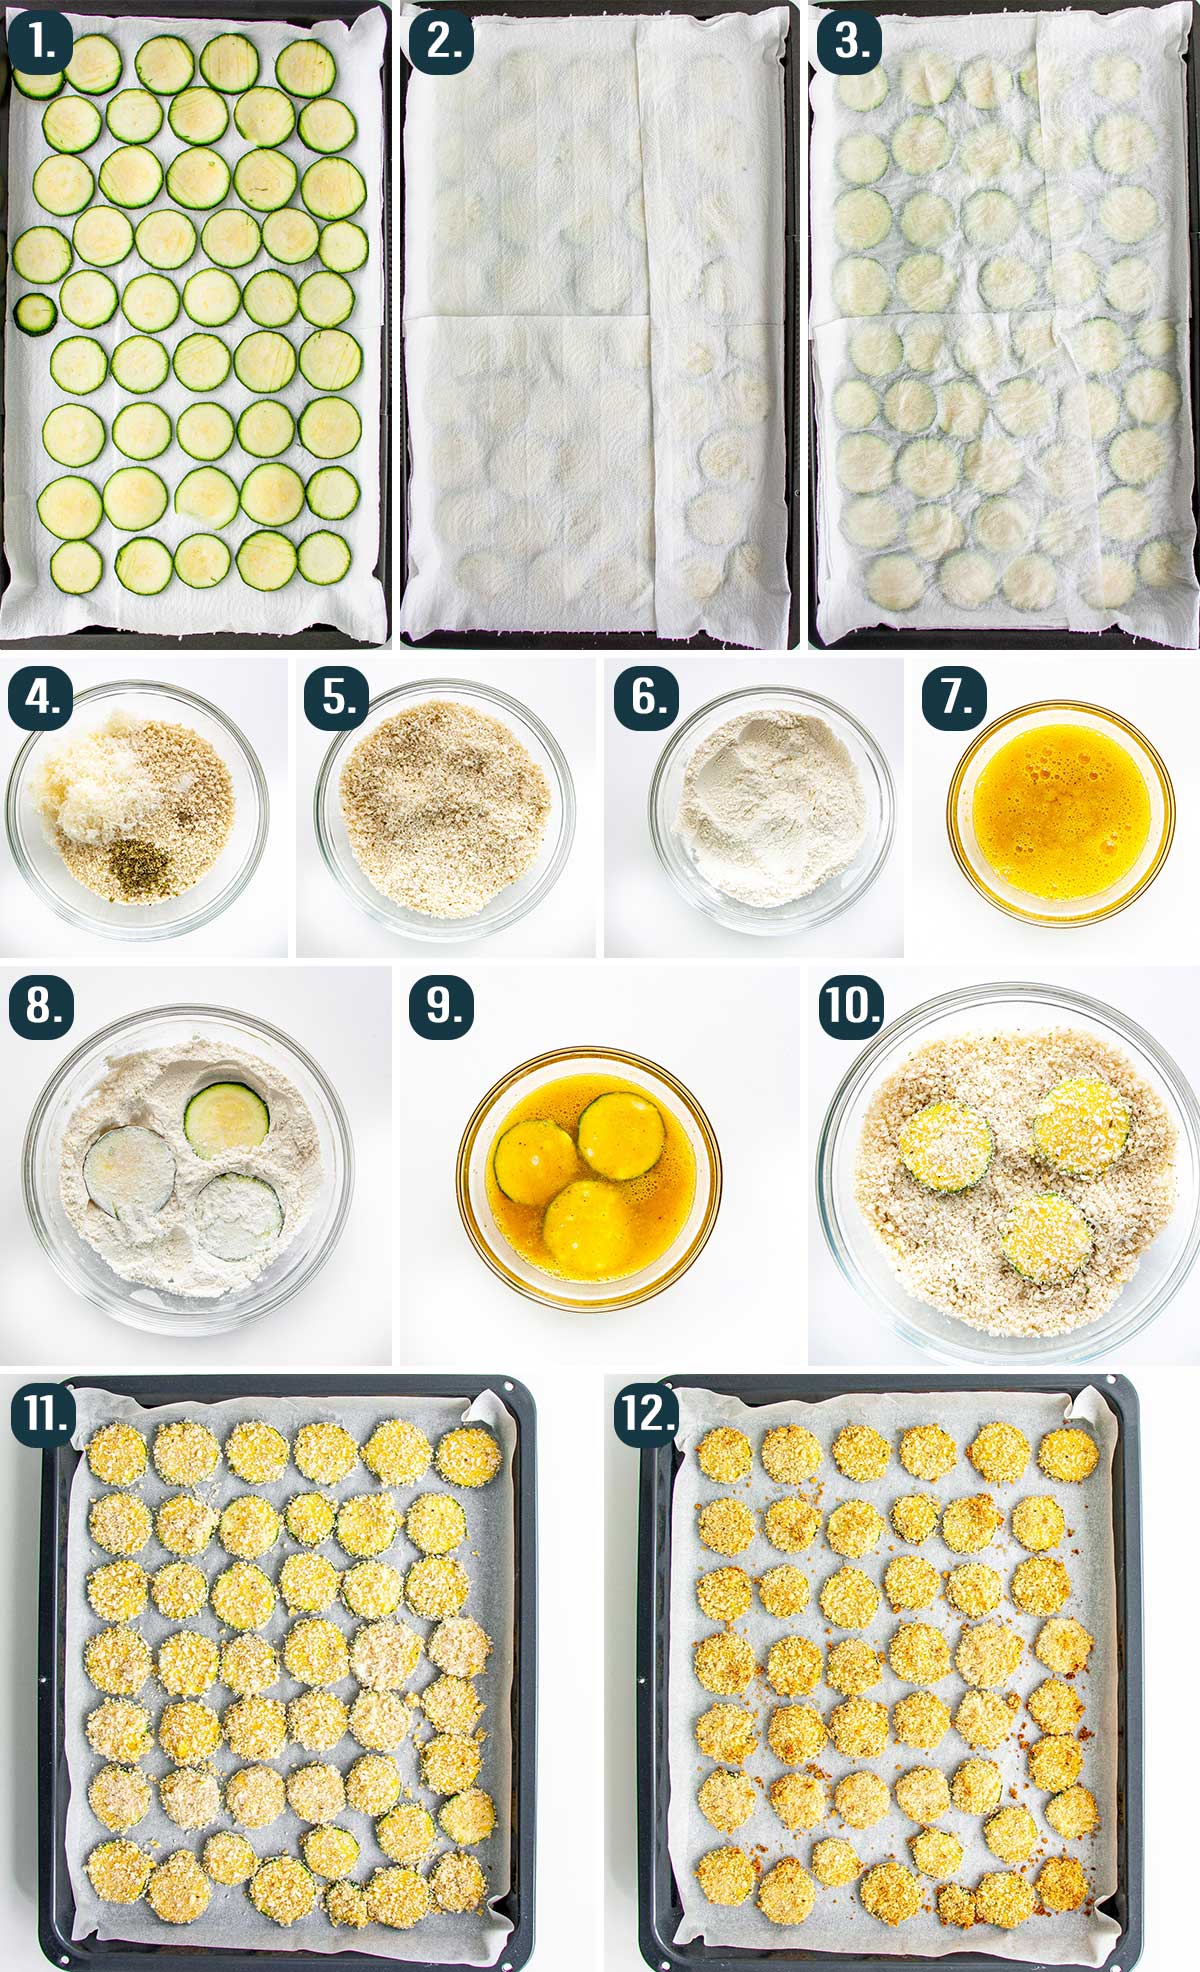 detailed process shots showing how to prep zucchini to make baked parmesan zucchini crisps